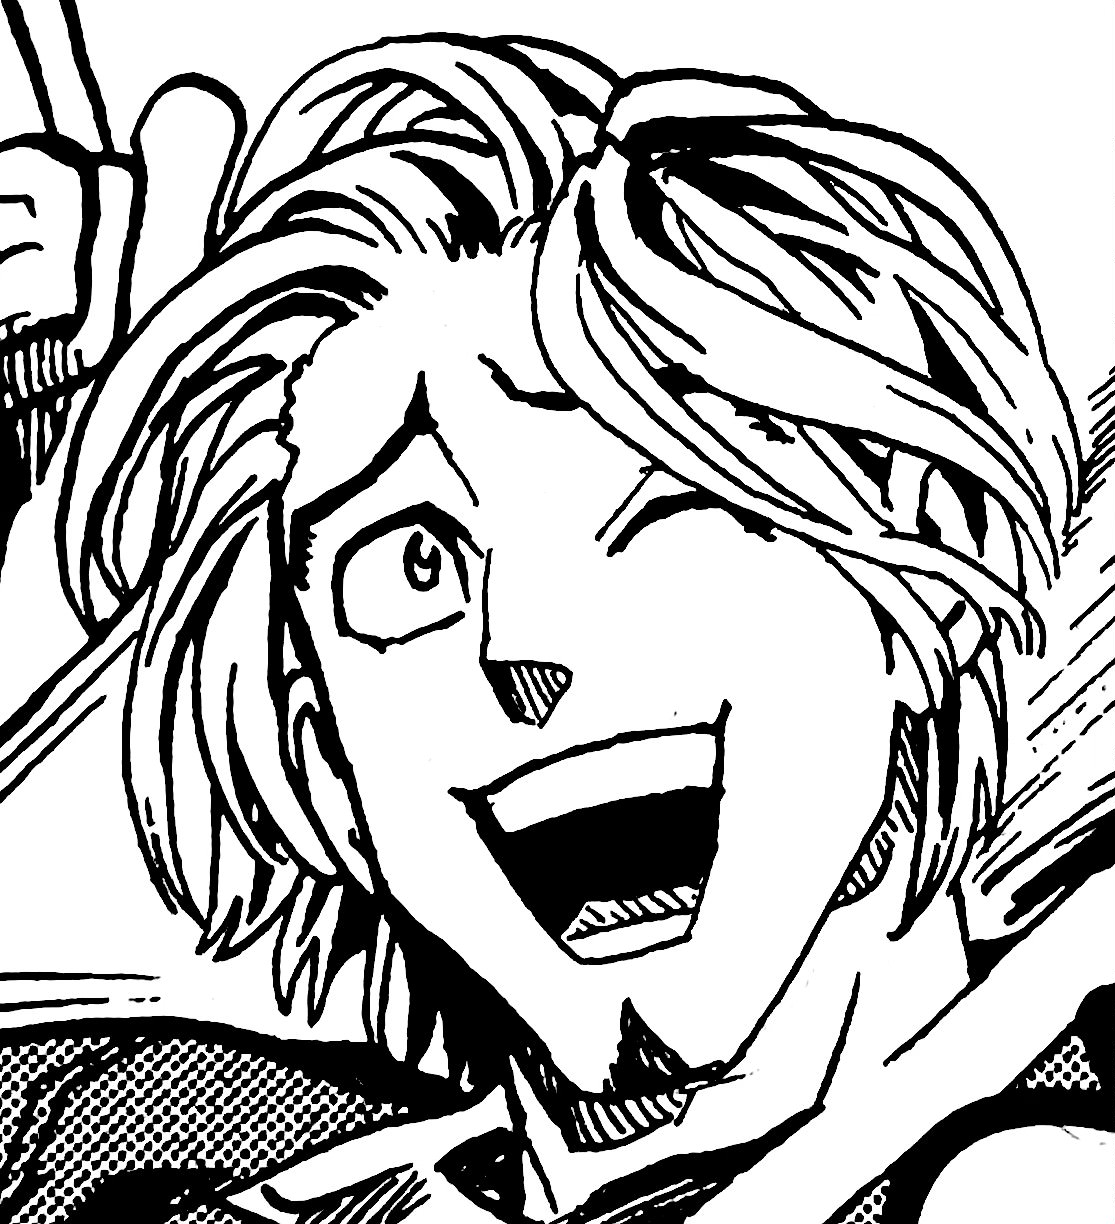 A thumbnail image of Natsuhiko Taki, a handsome teenager with long blond hair and a goatee, smiling and winking to his audience.